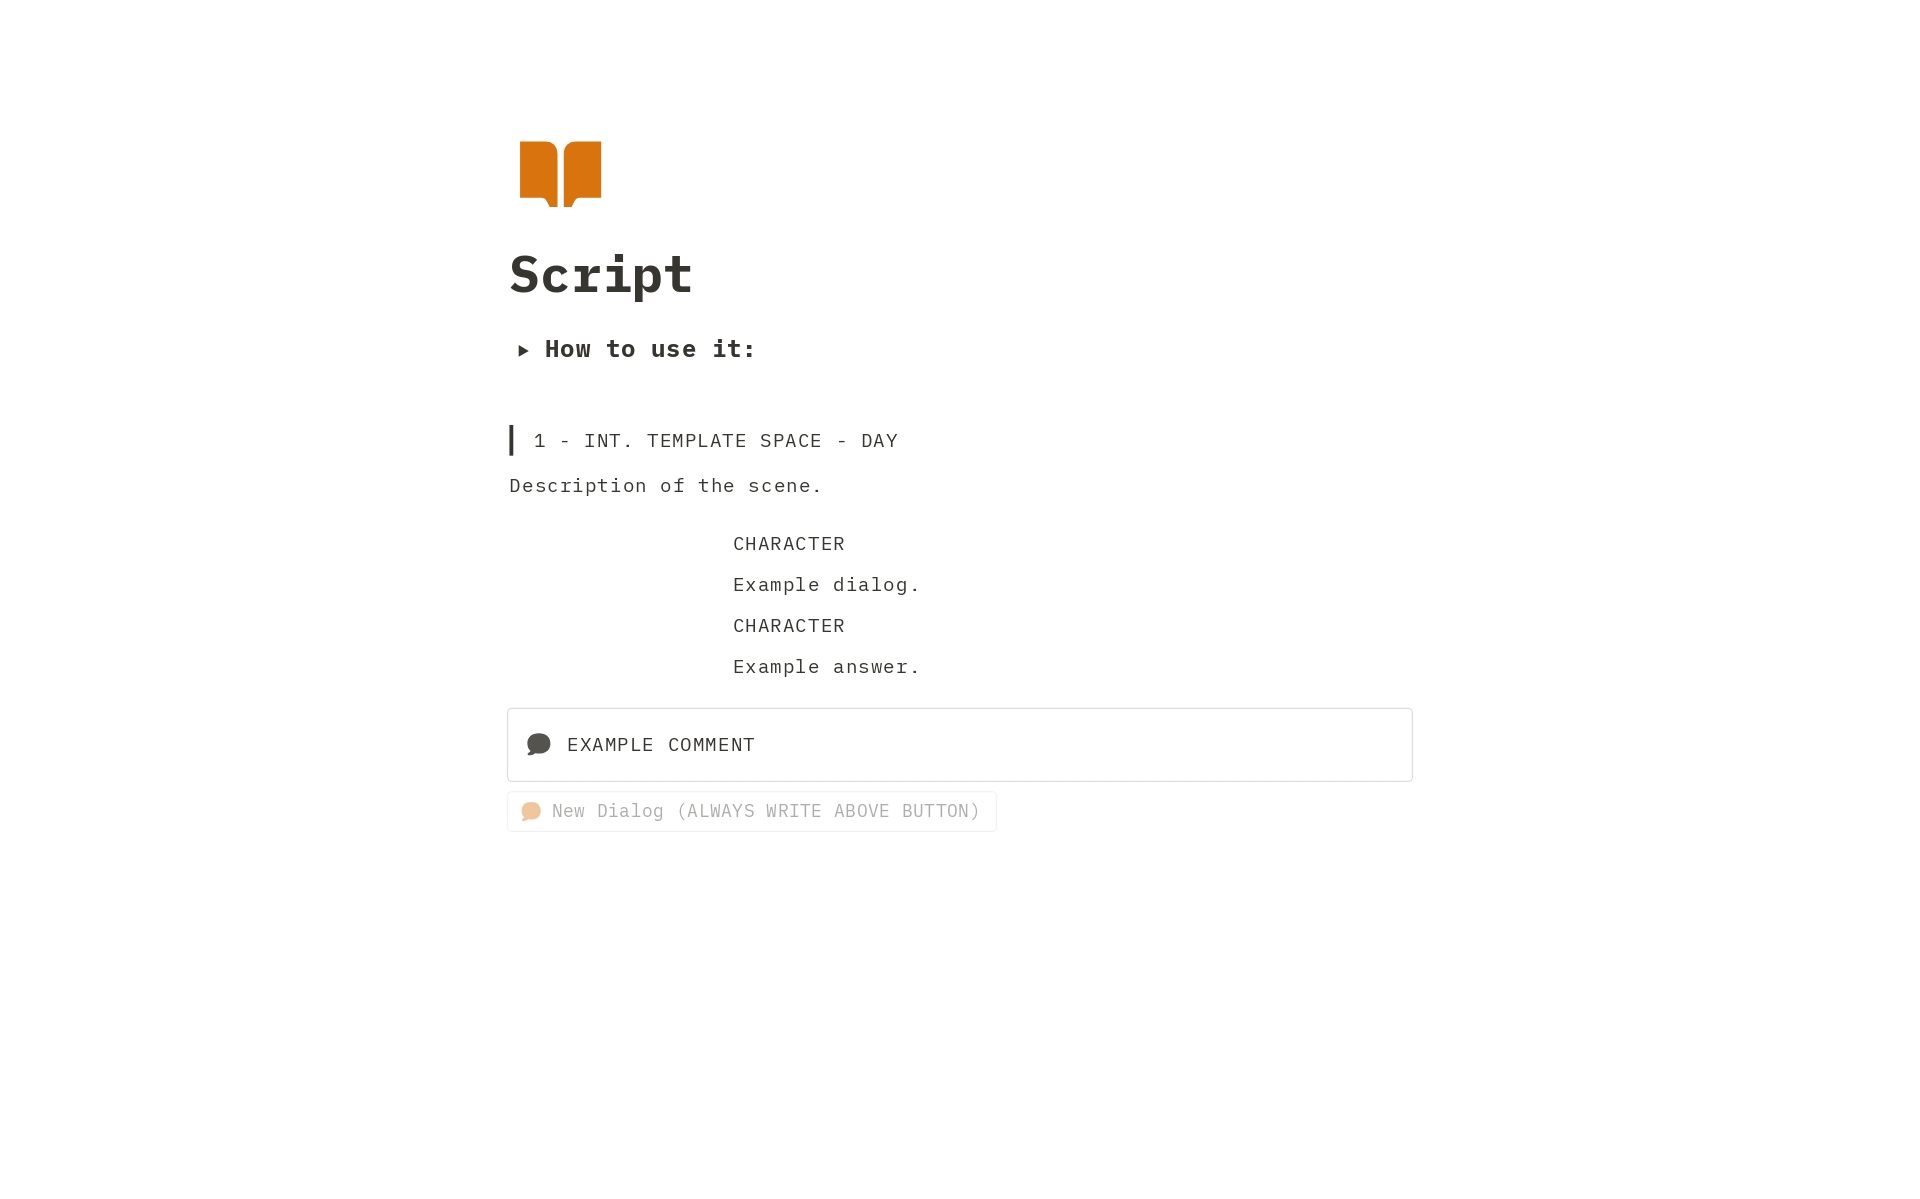 Looking for a scriptwriting tool? This Notion Template is a cost-effective alternative to Celtx and Studiobinder. Write, edit, comment, collaborate, and export scripts for TV series, commercials, or feature films with ease. Includes a user guide to get you started quickly!